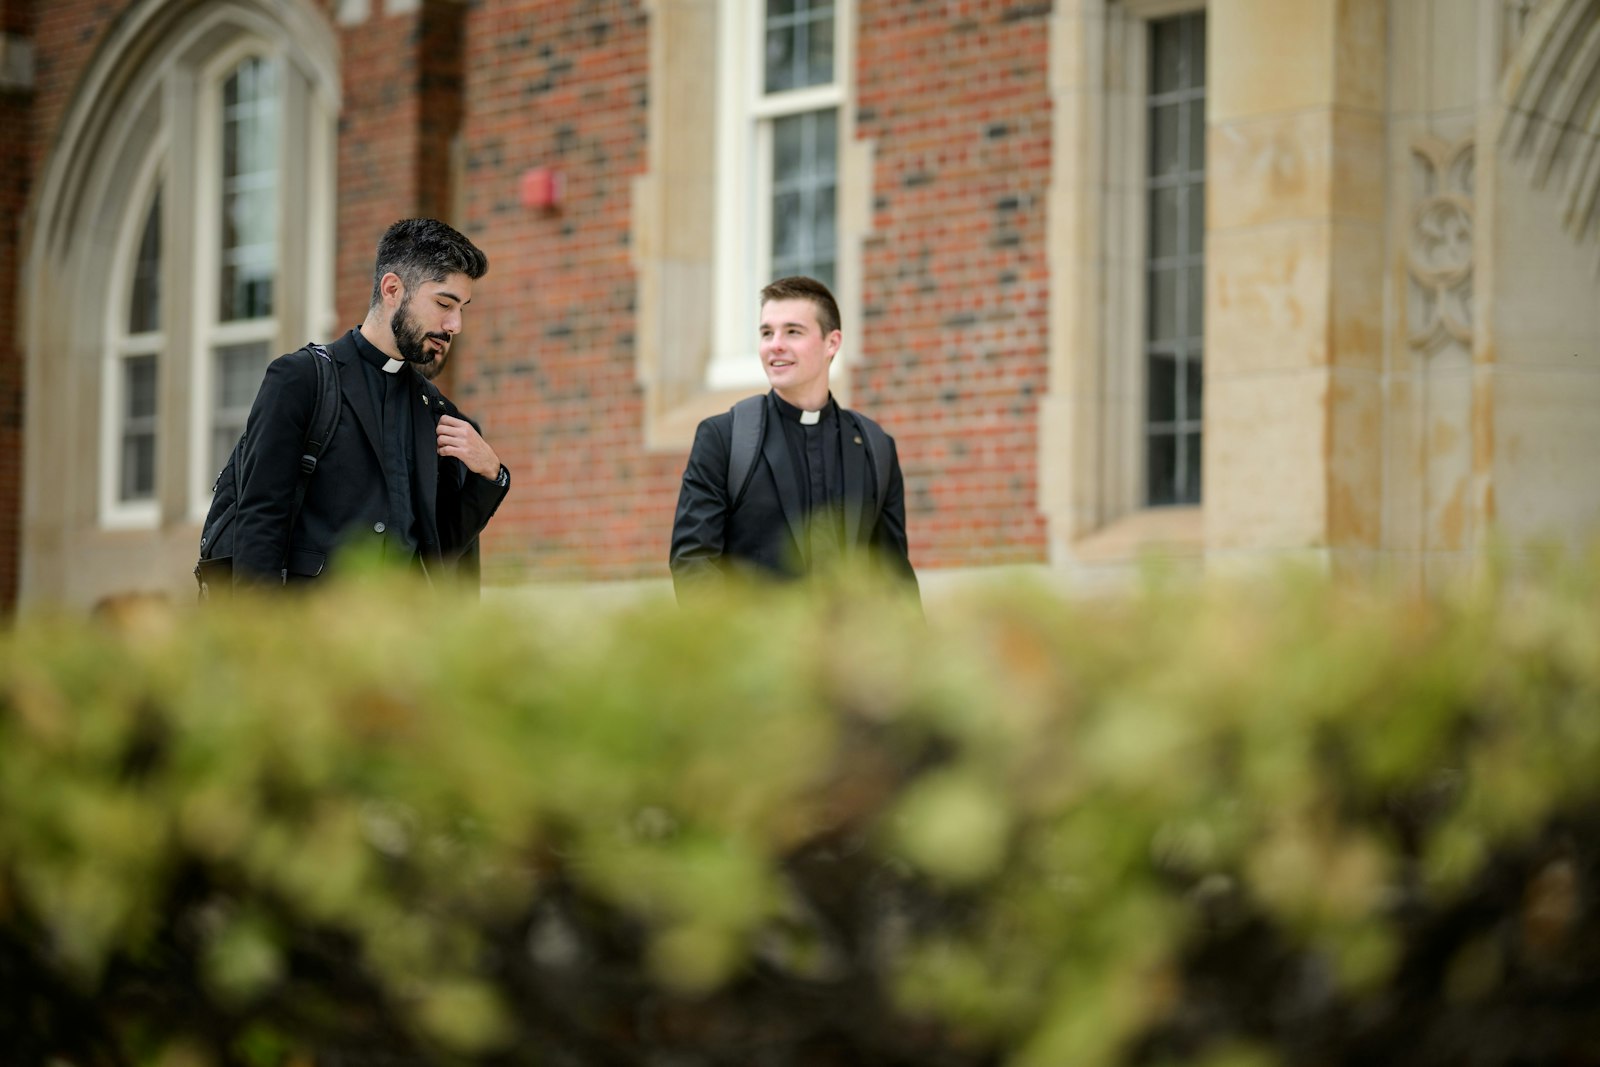 The propaedeutic year has been installed in other seminaries around the country, and has yielded positive results for seminarians who appreciate the time to unplug from the outside world and reconnect with the people and community in front of them, Fr. Pullis said.